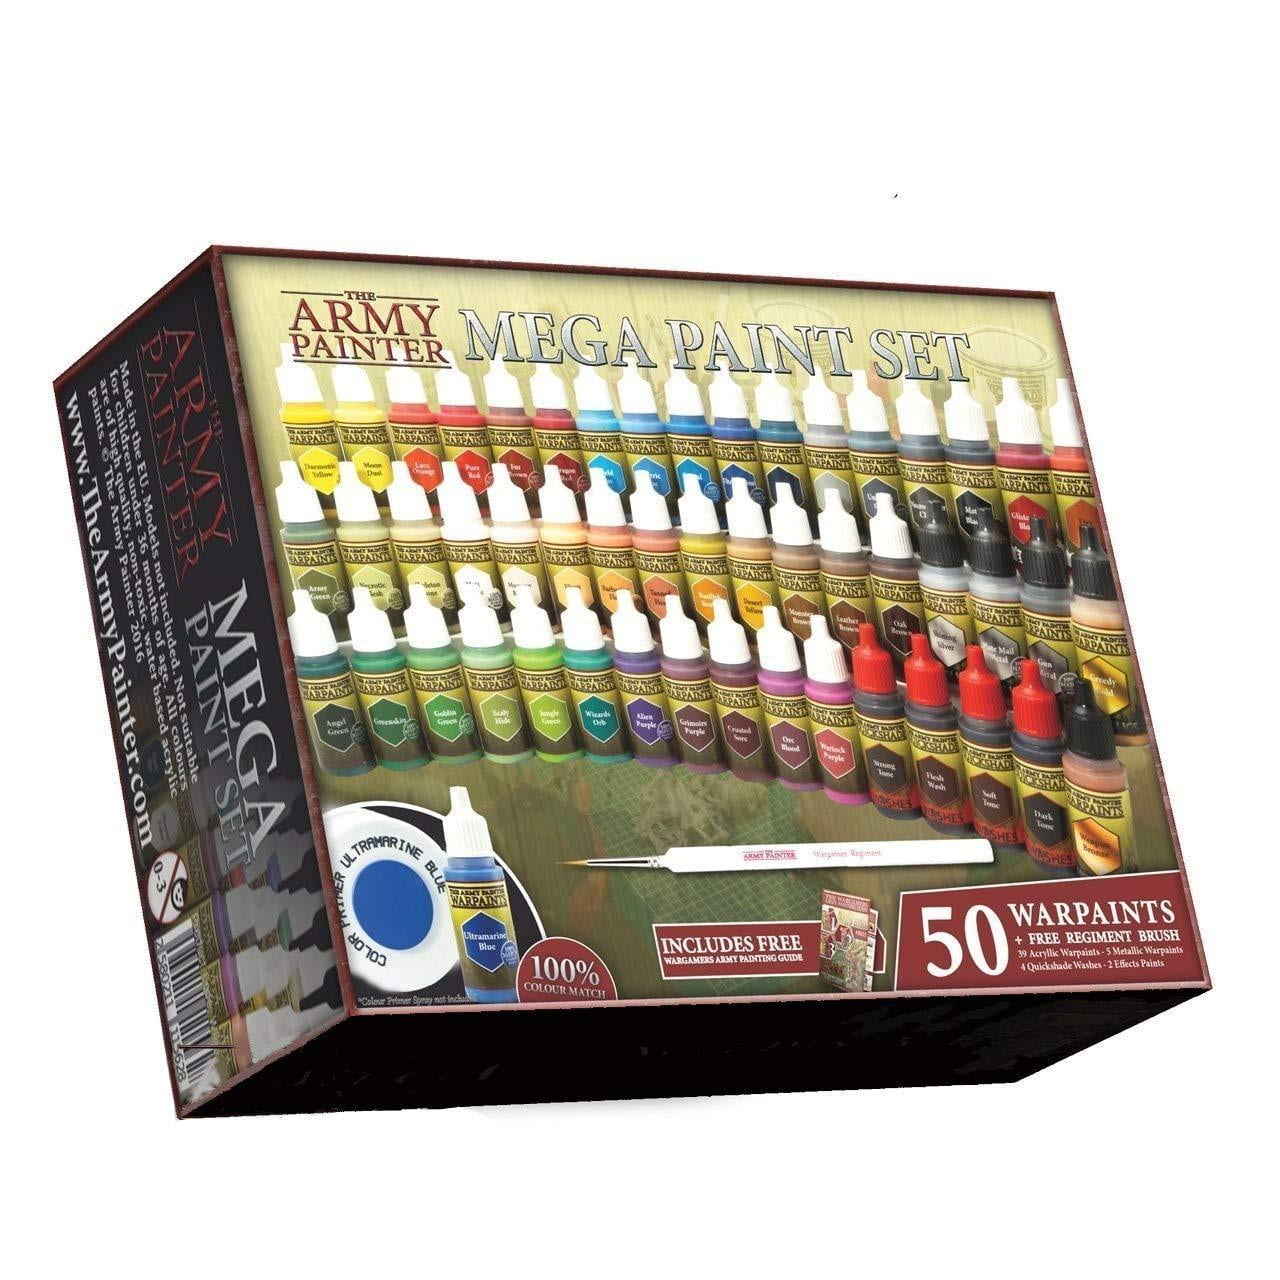 The Army Painter Miniature Painting Kit 